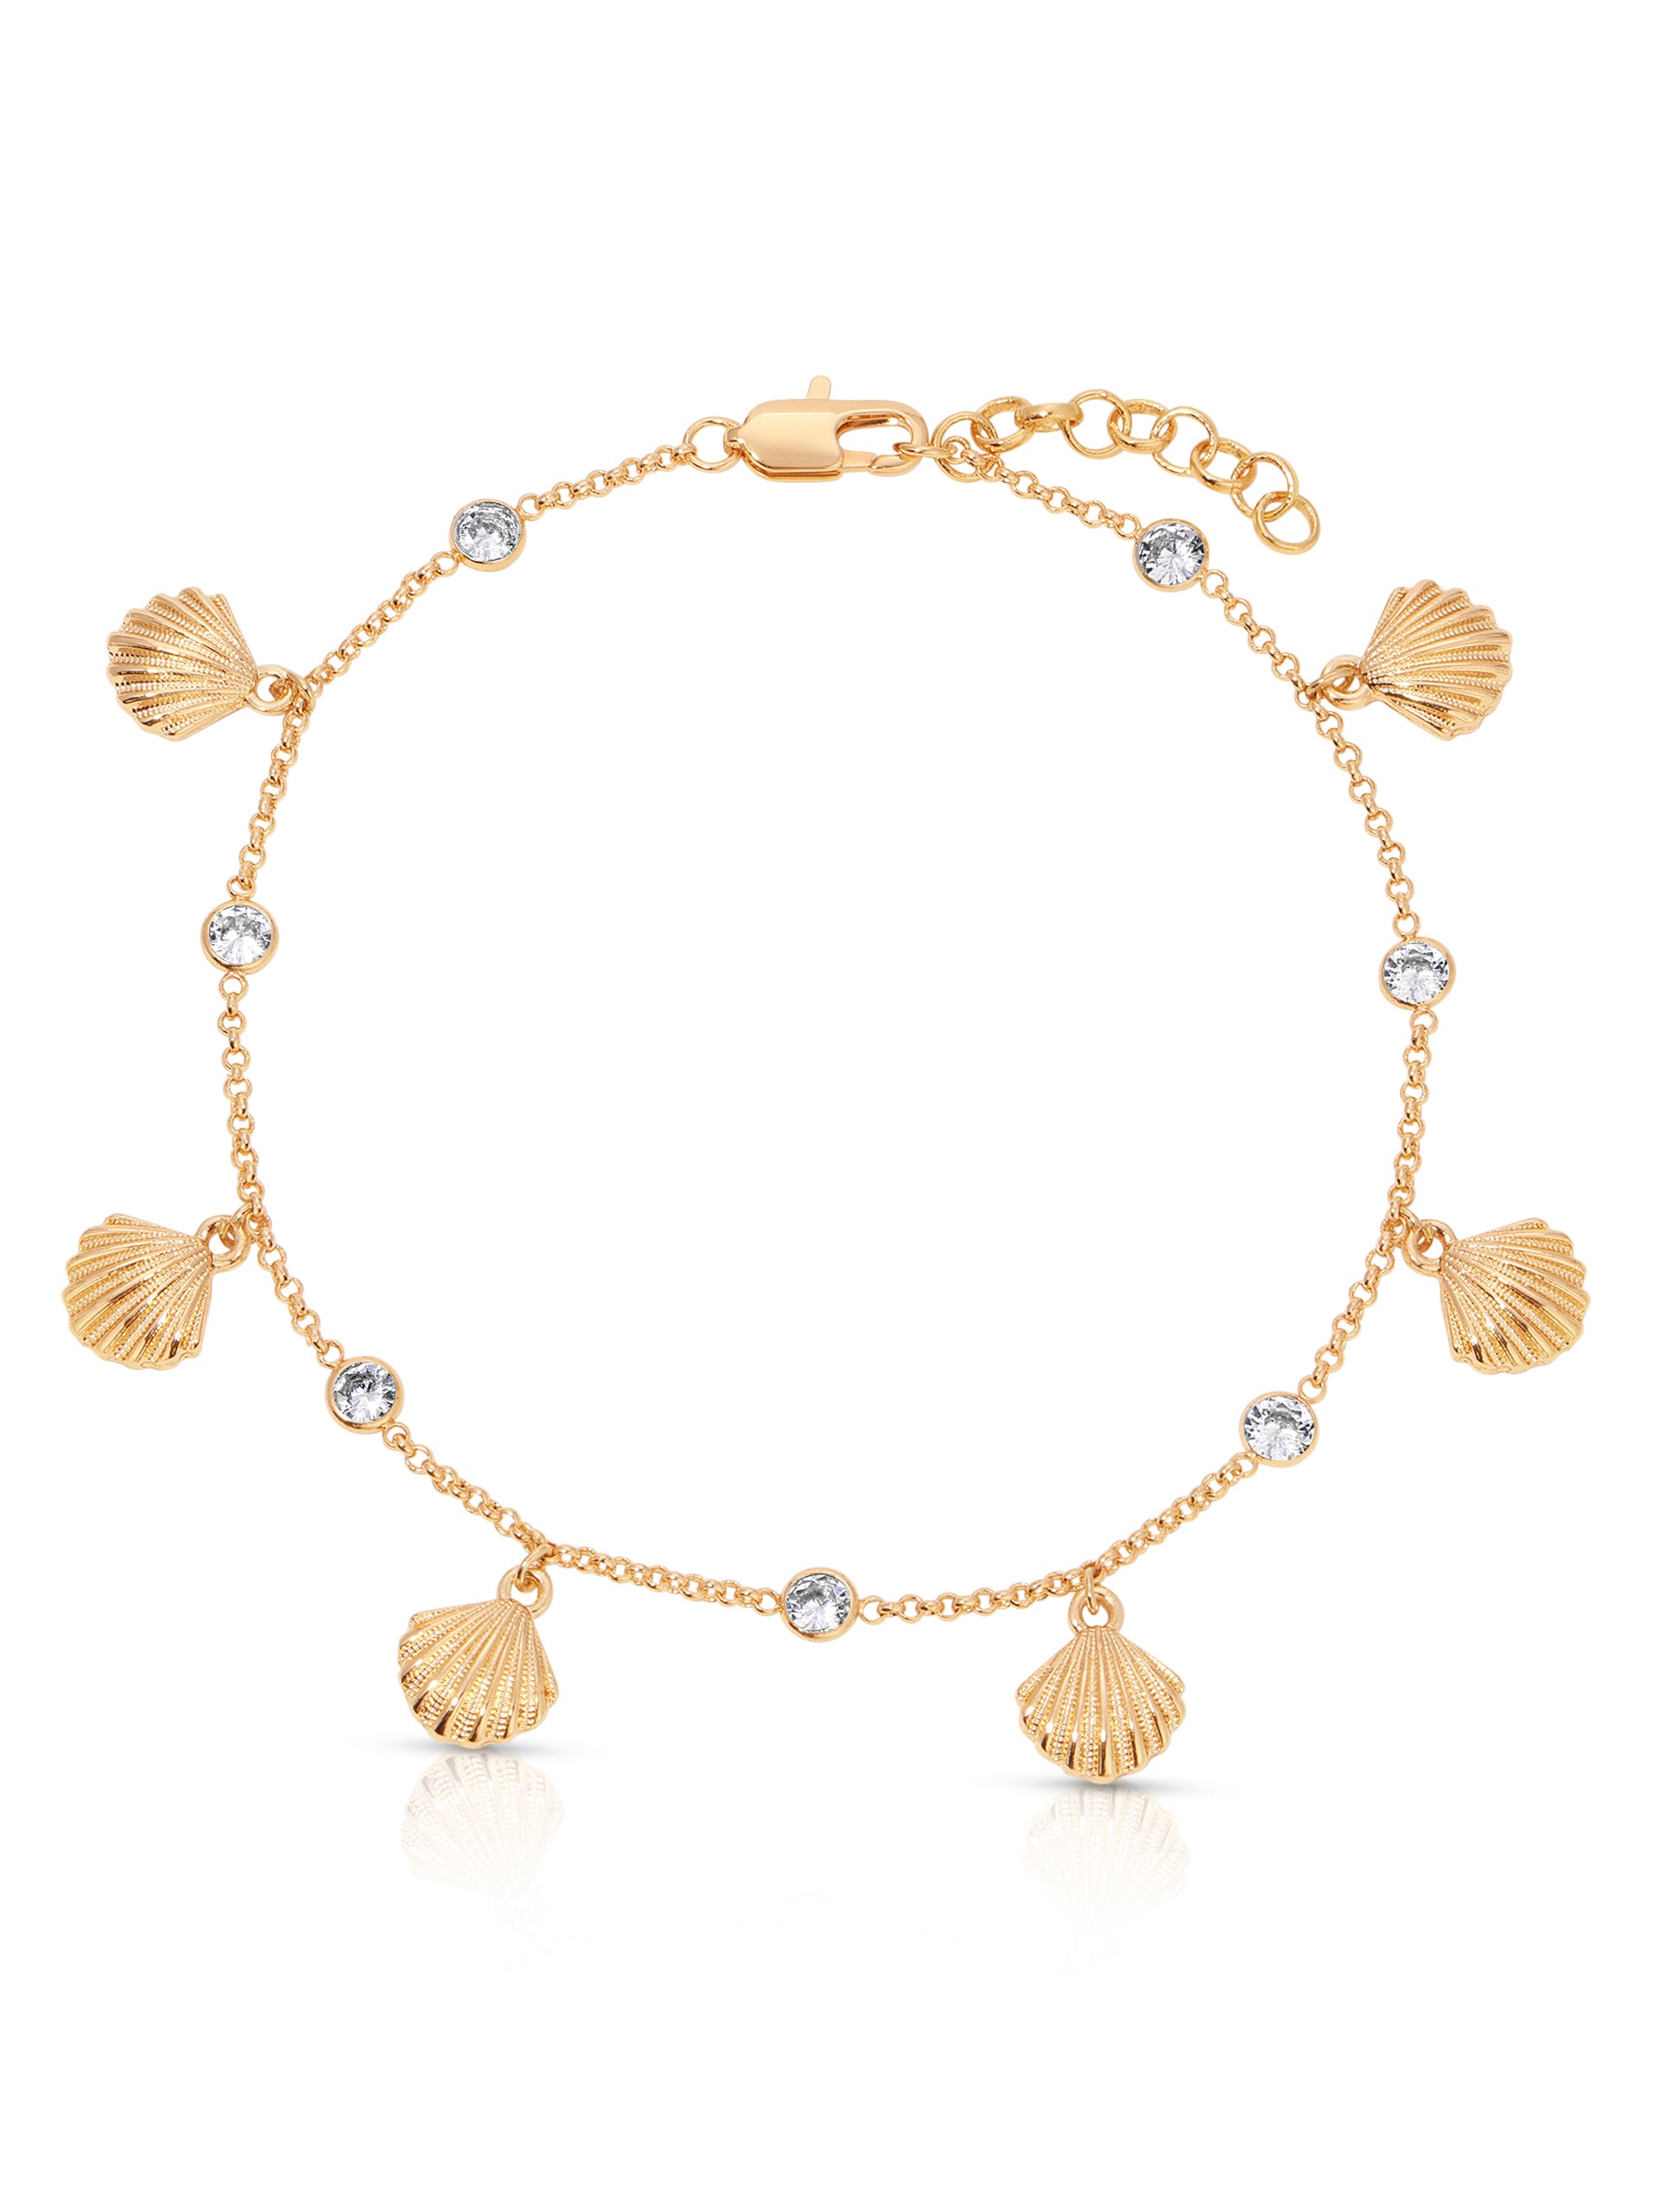 Scallop Shell Charm Anklet